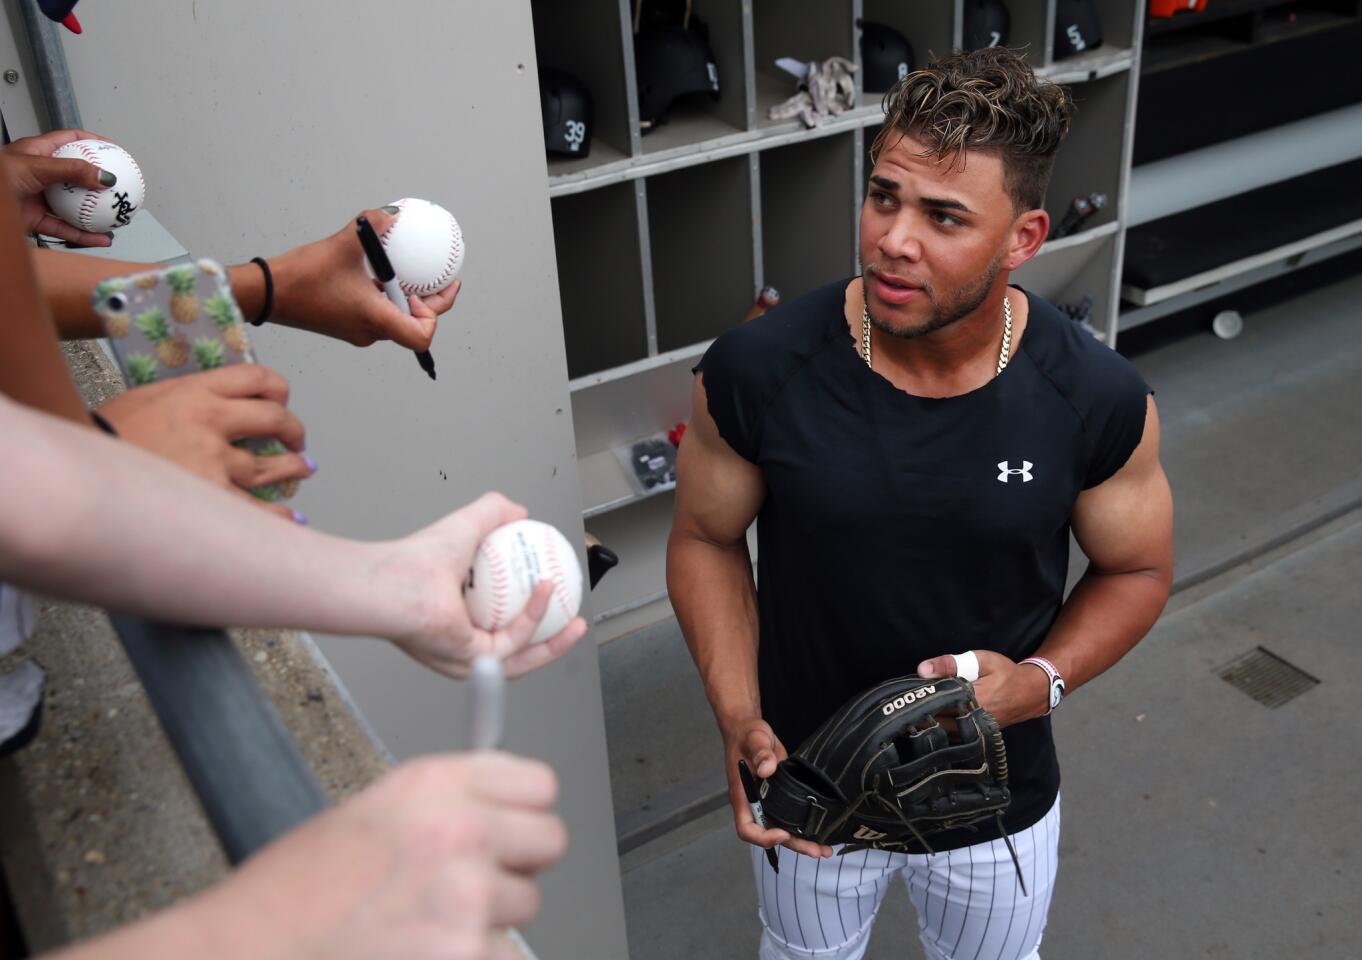 Yoan Moncada signs autographs before the start of the game against the Cubs at Guaranteed Rate Field on Wednesday, July 26, 2017.